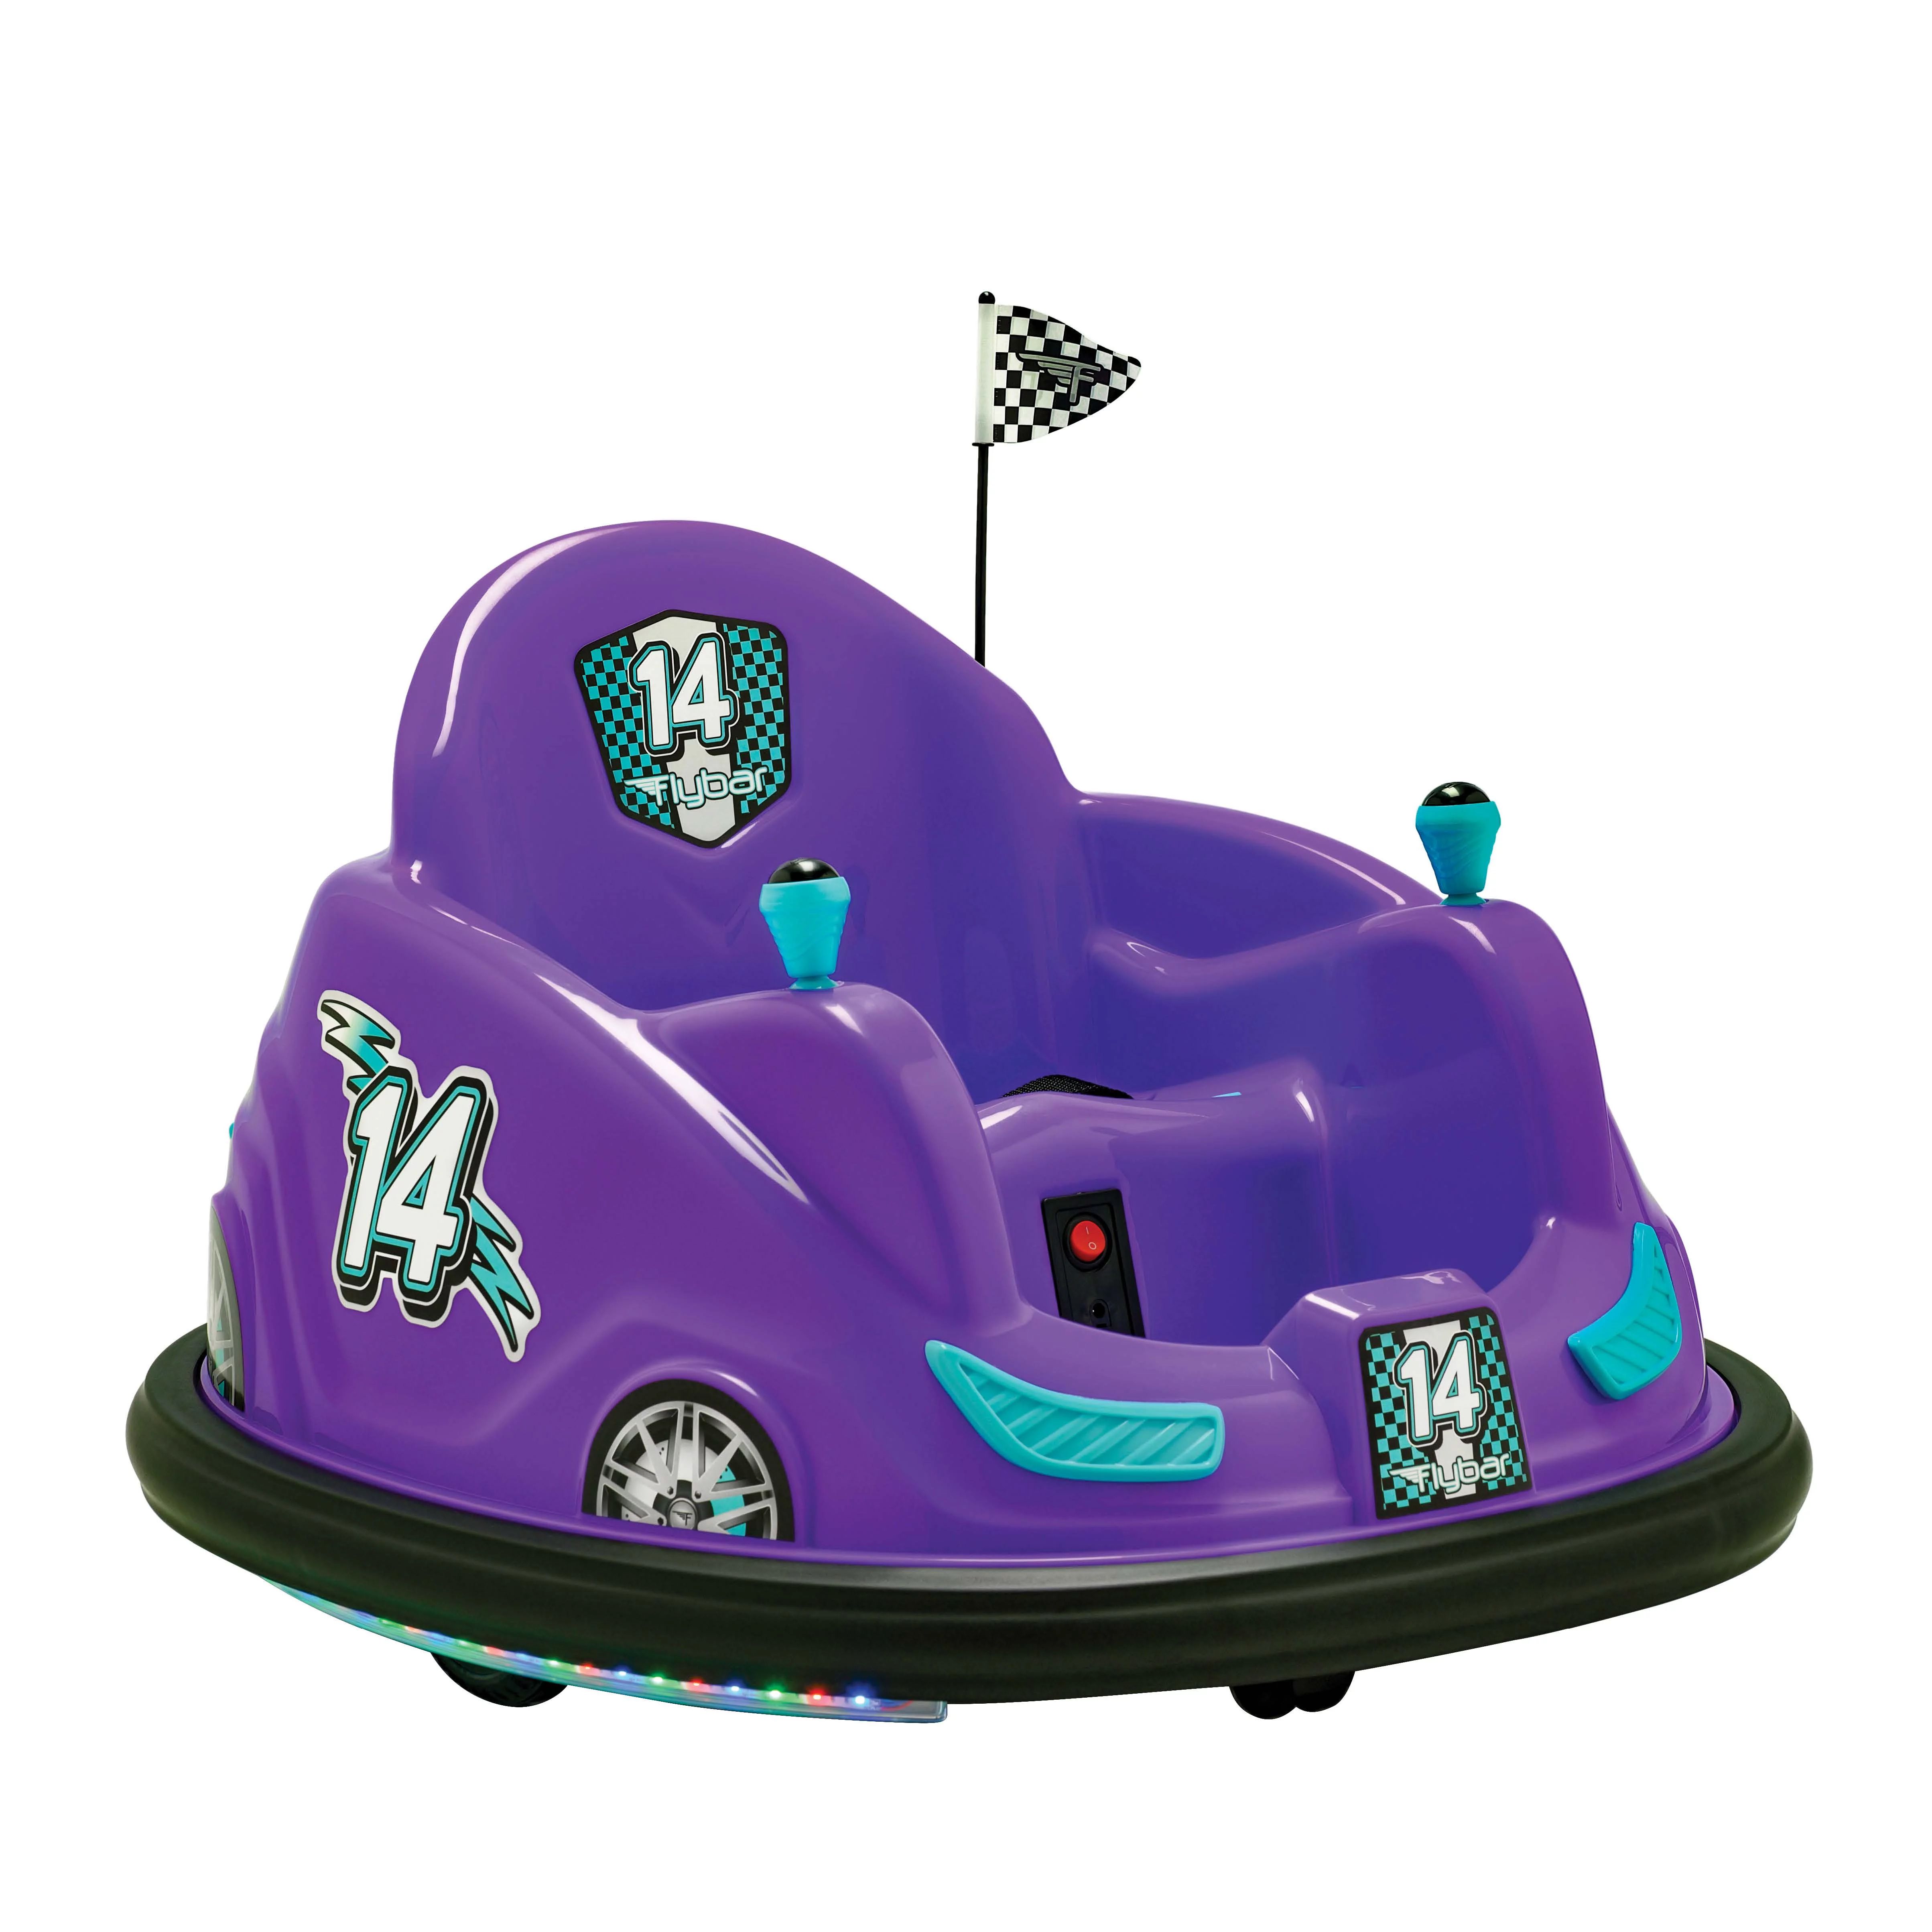 Flybar 6V Bumper Car, Battery Powered Ride On, Fun LED Lights, Includes Charger, Purple | Walmart (US)